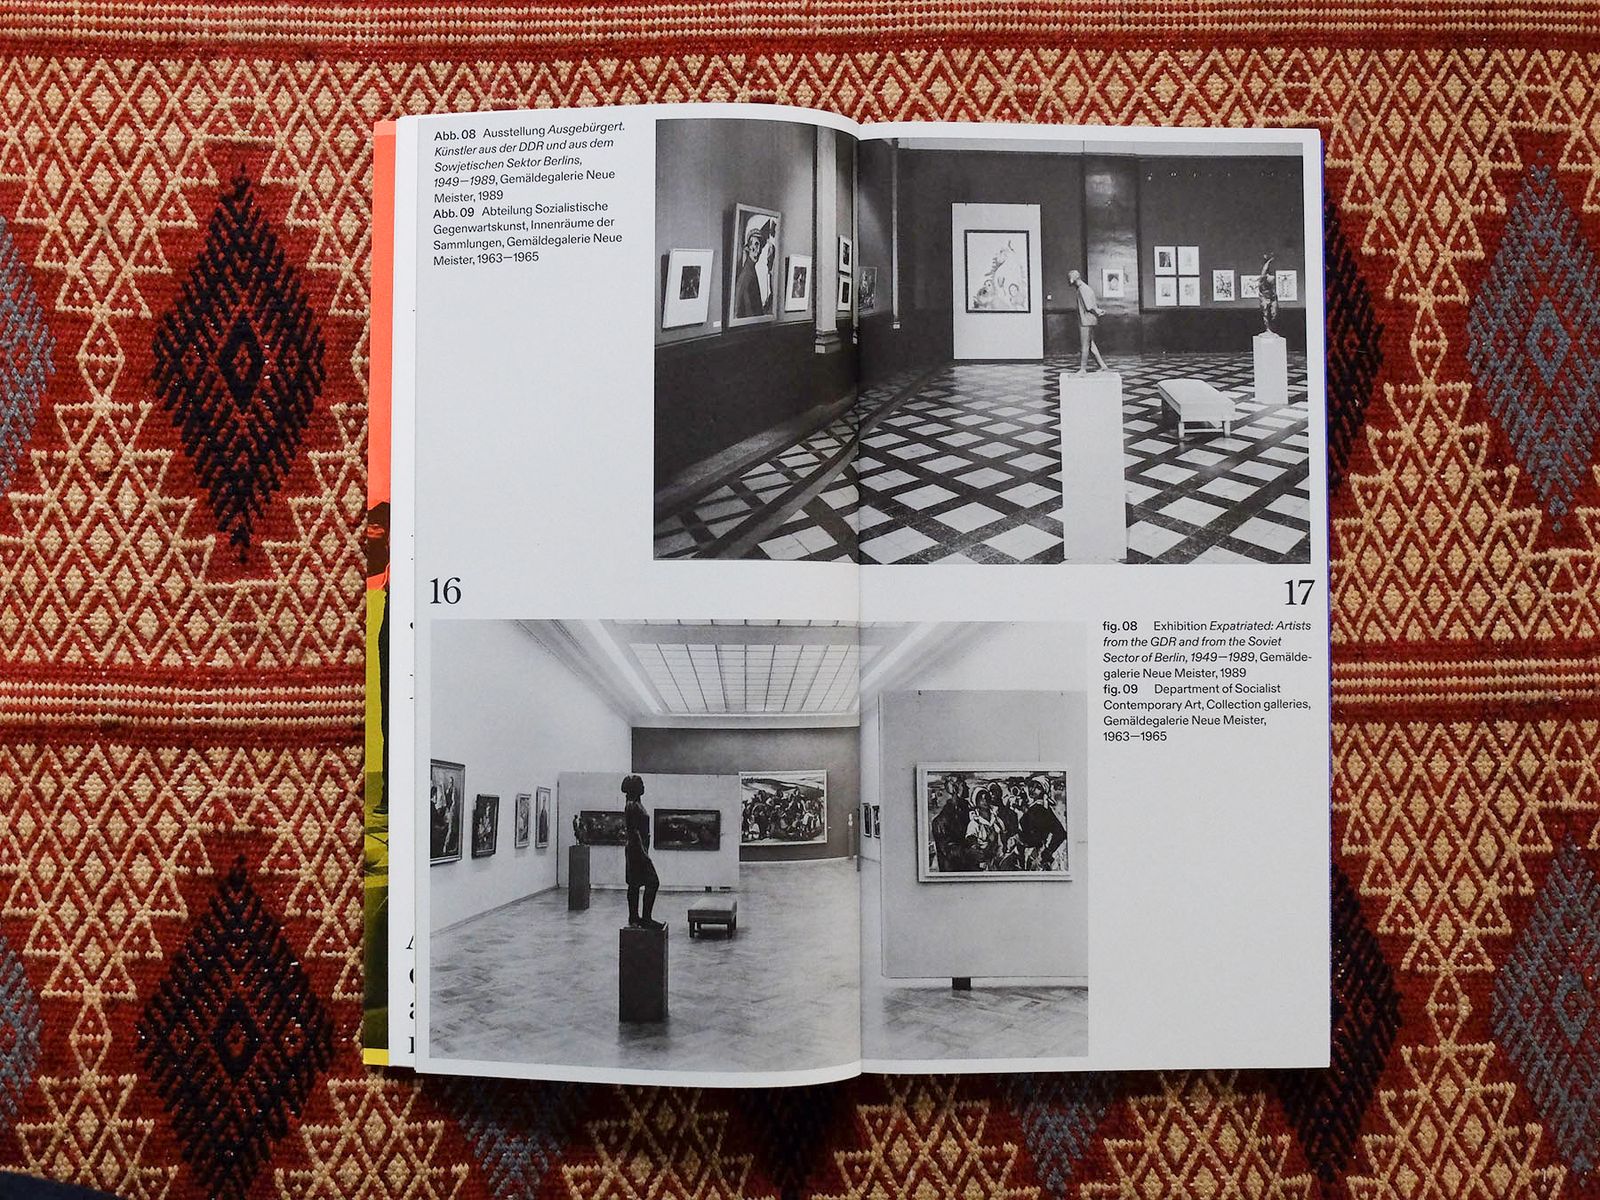 © Leporello Books - Image from the DEMONSTRATION ROOMS by AA.VV. photography project